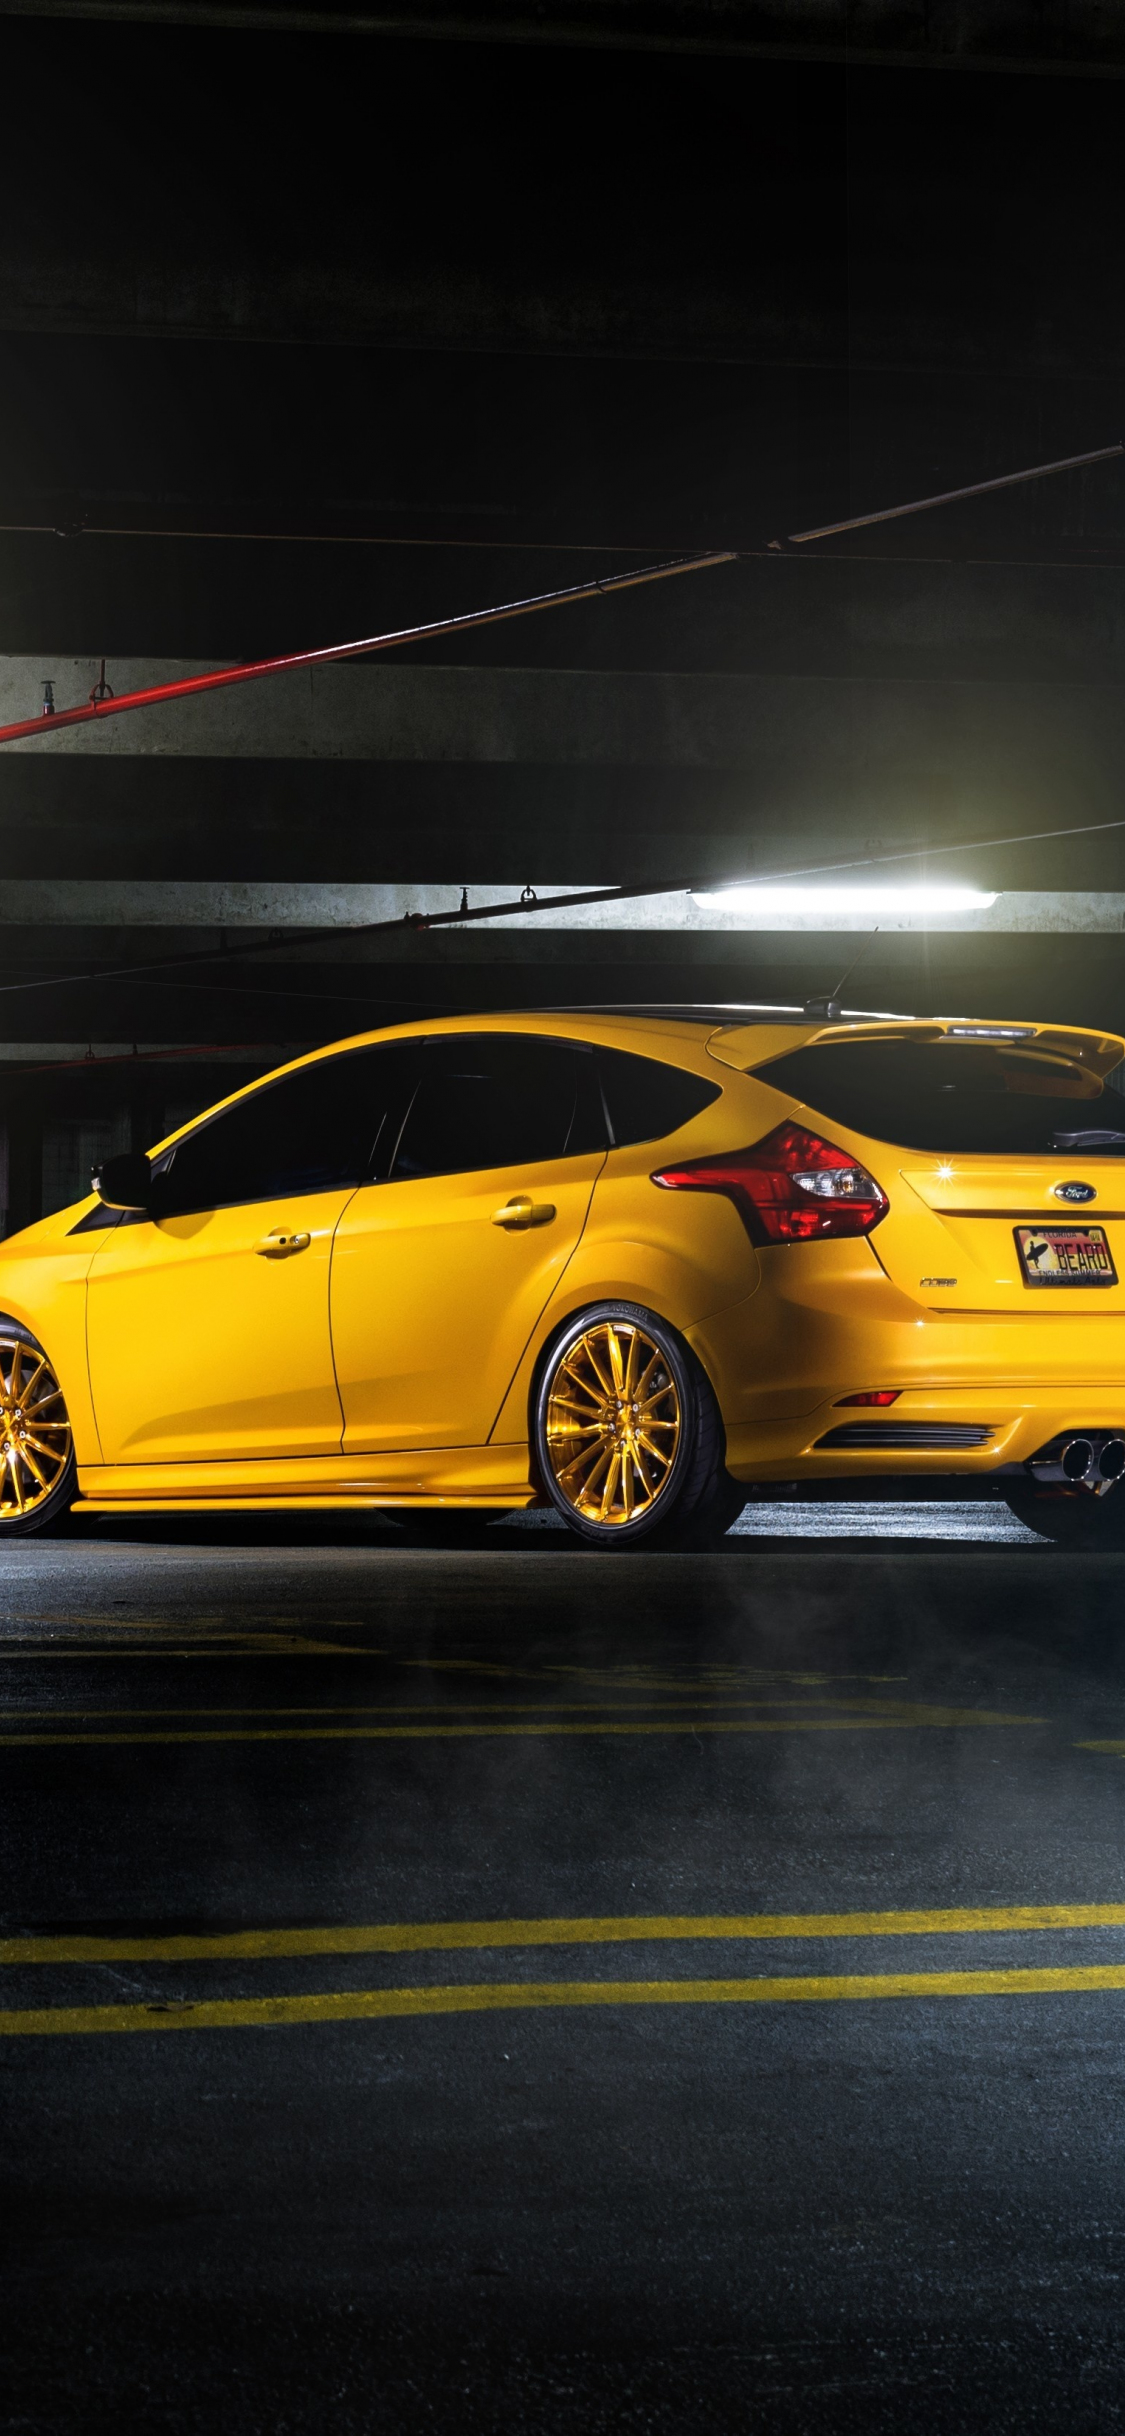 Download wallpaper 1125x2436 parking lot, ford focus rs, iphone x,  1125x2436 hd background, 9191